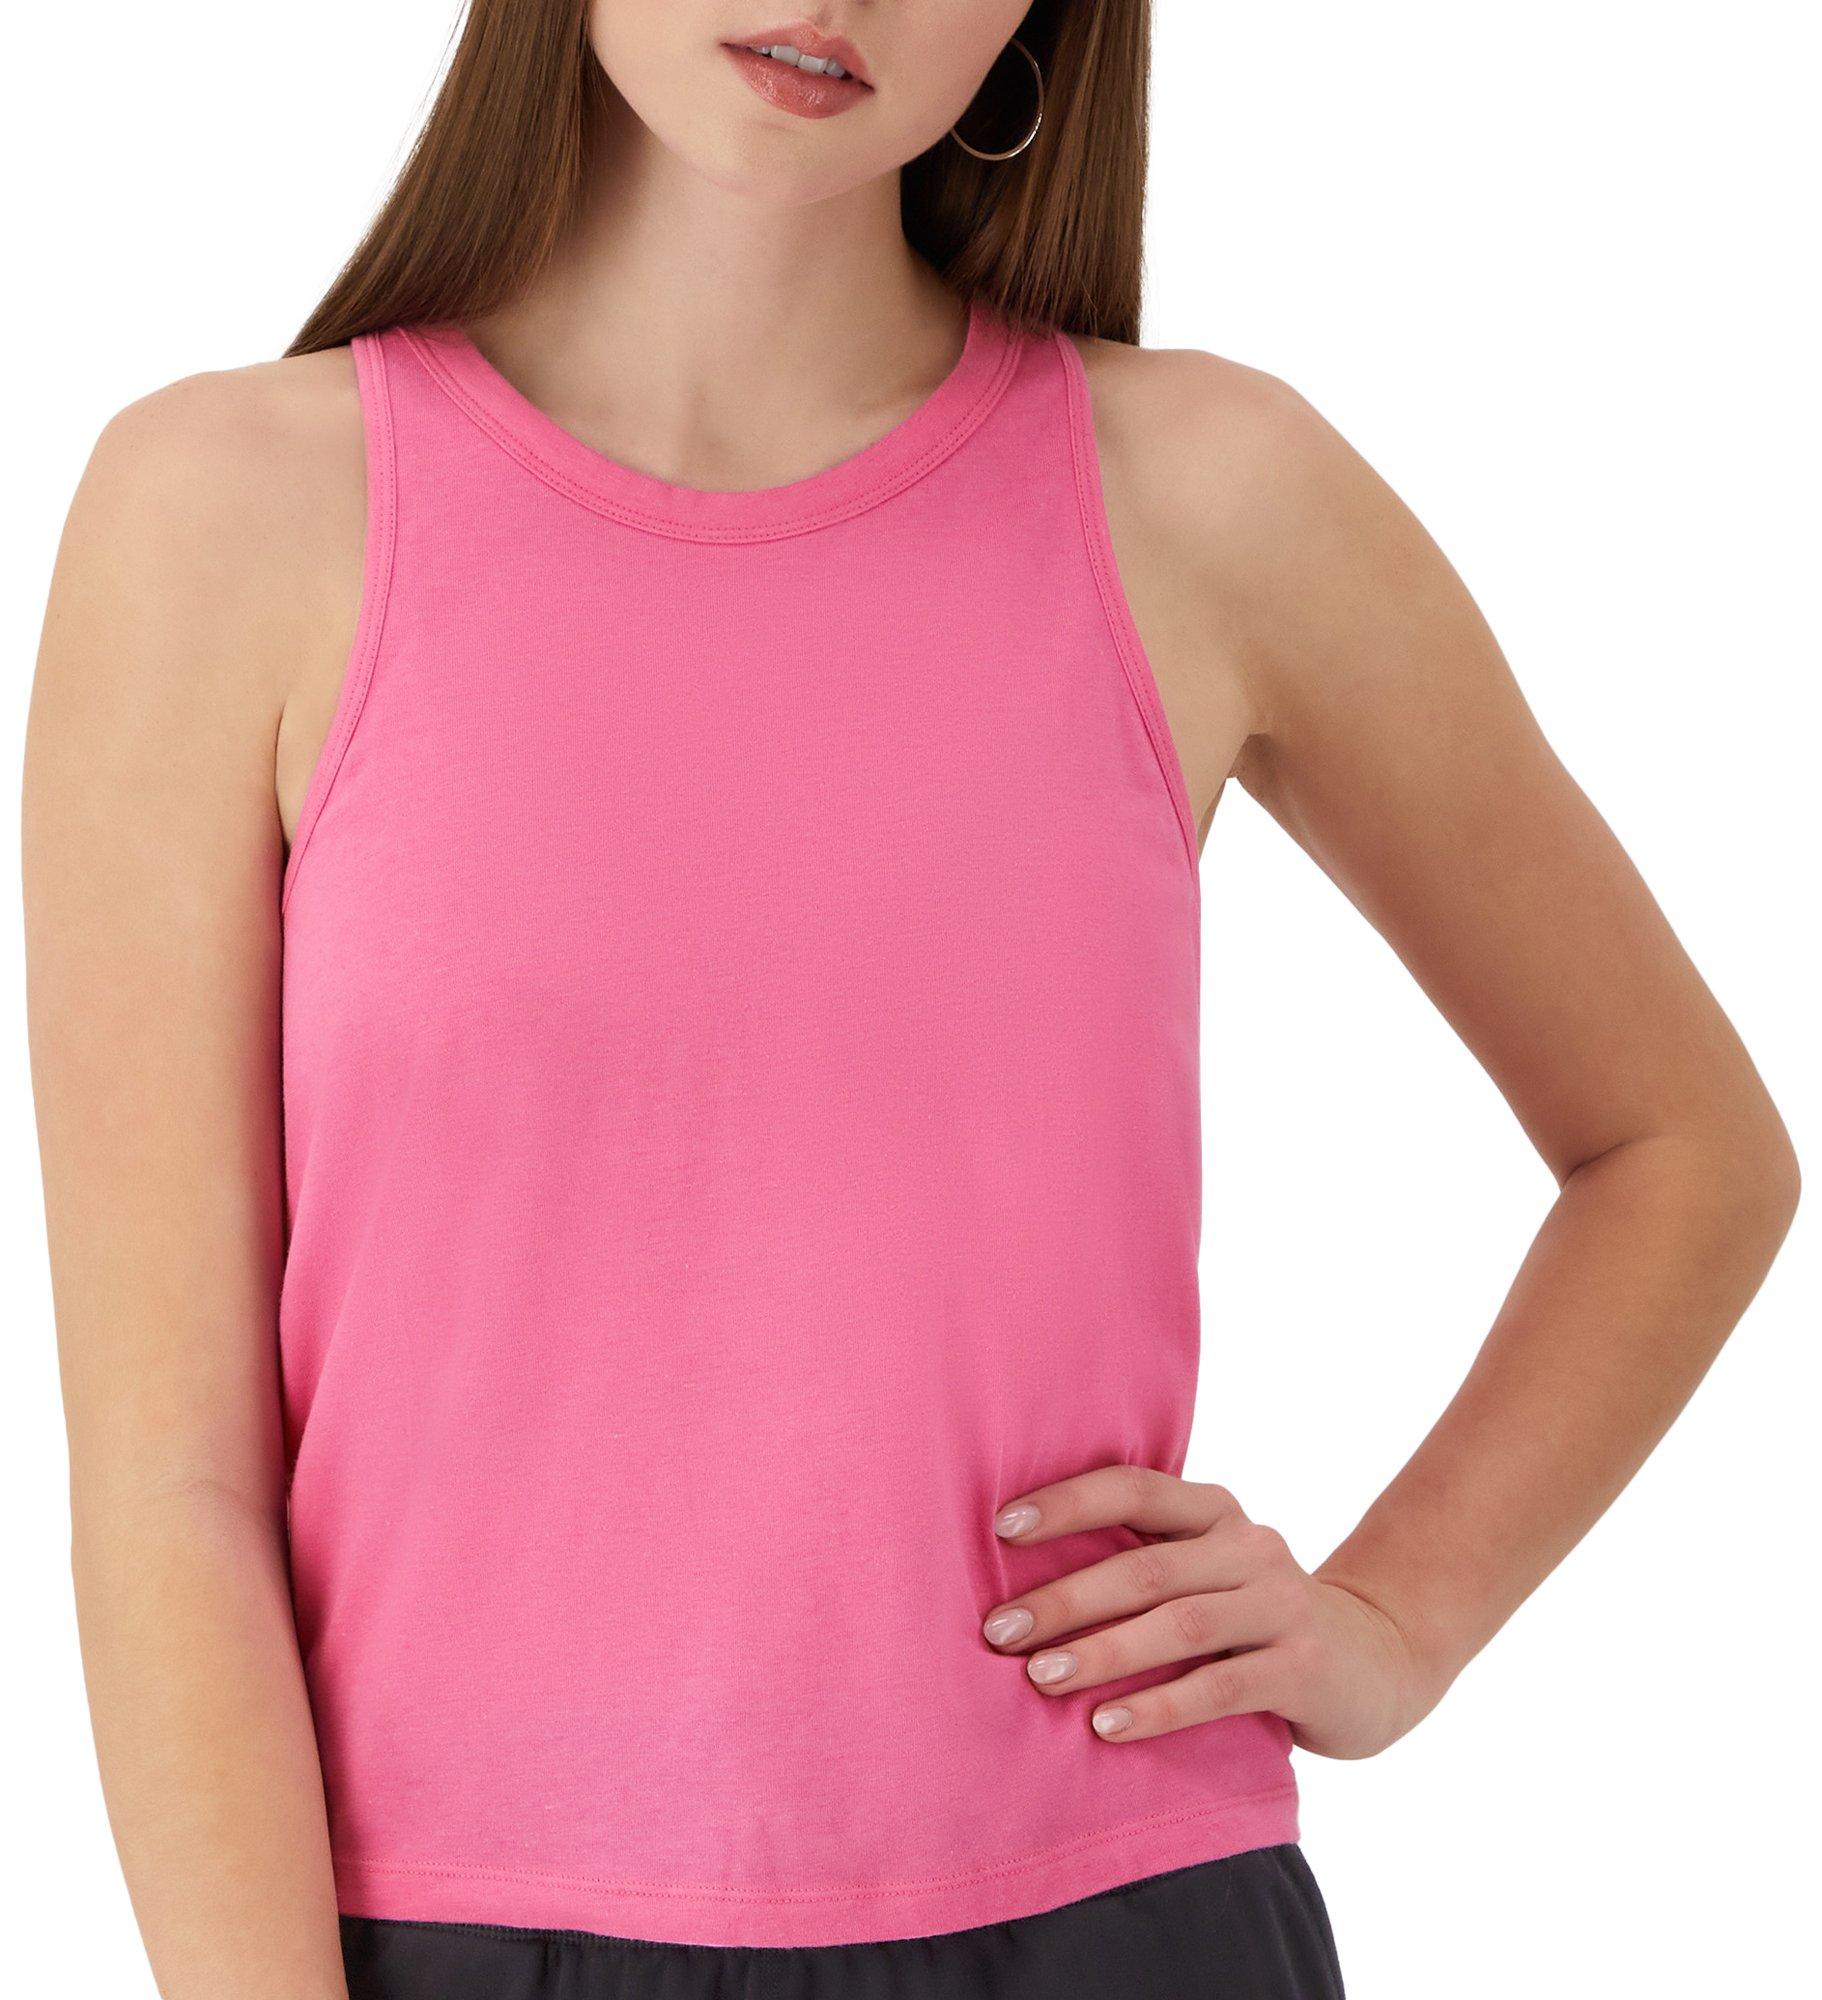 Champion Womens Soft Touch Anti-Odor Tank Top